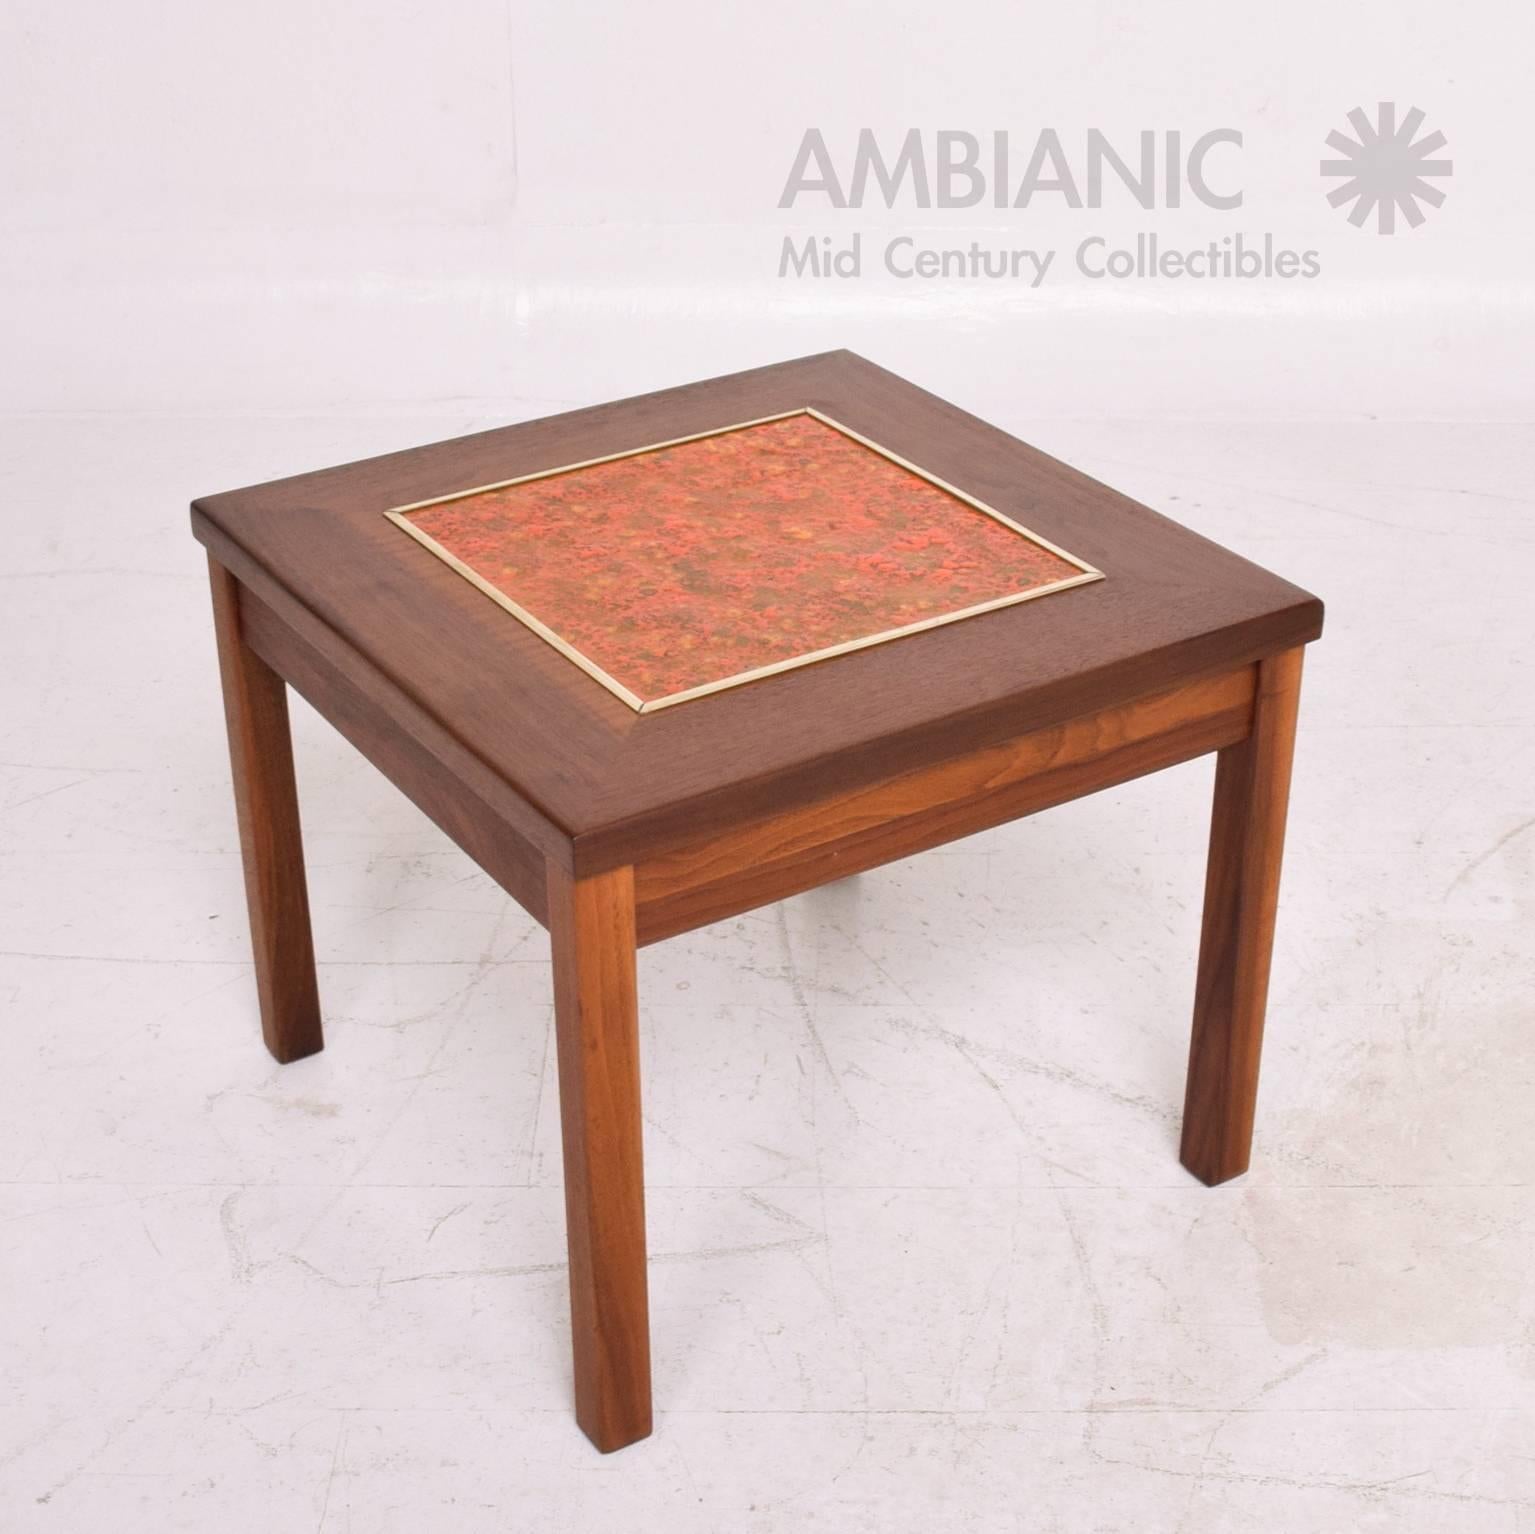 For your consideration a Mid-Century Modern walnut side table with orange enamel top.

USA, circa 1960s
Measures: 15 1/2